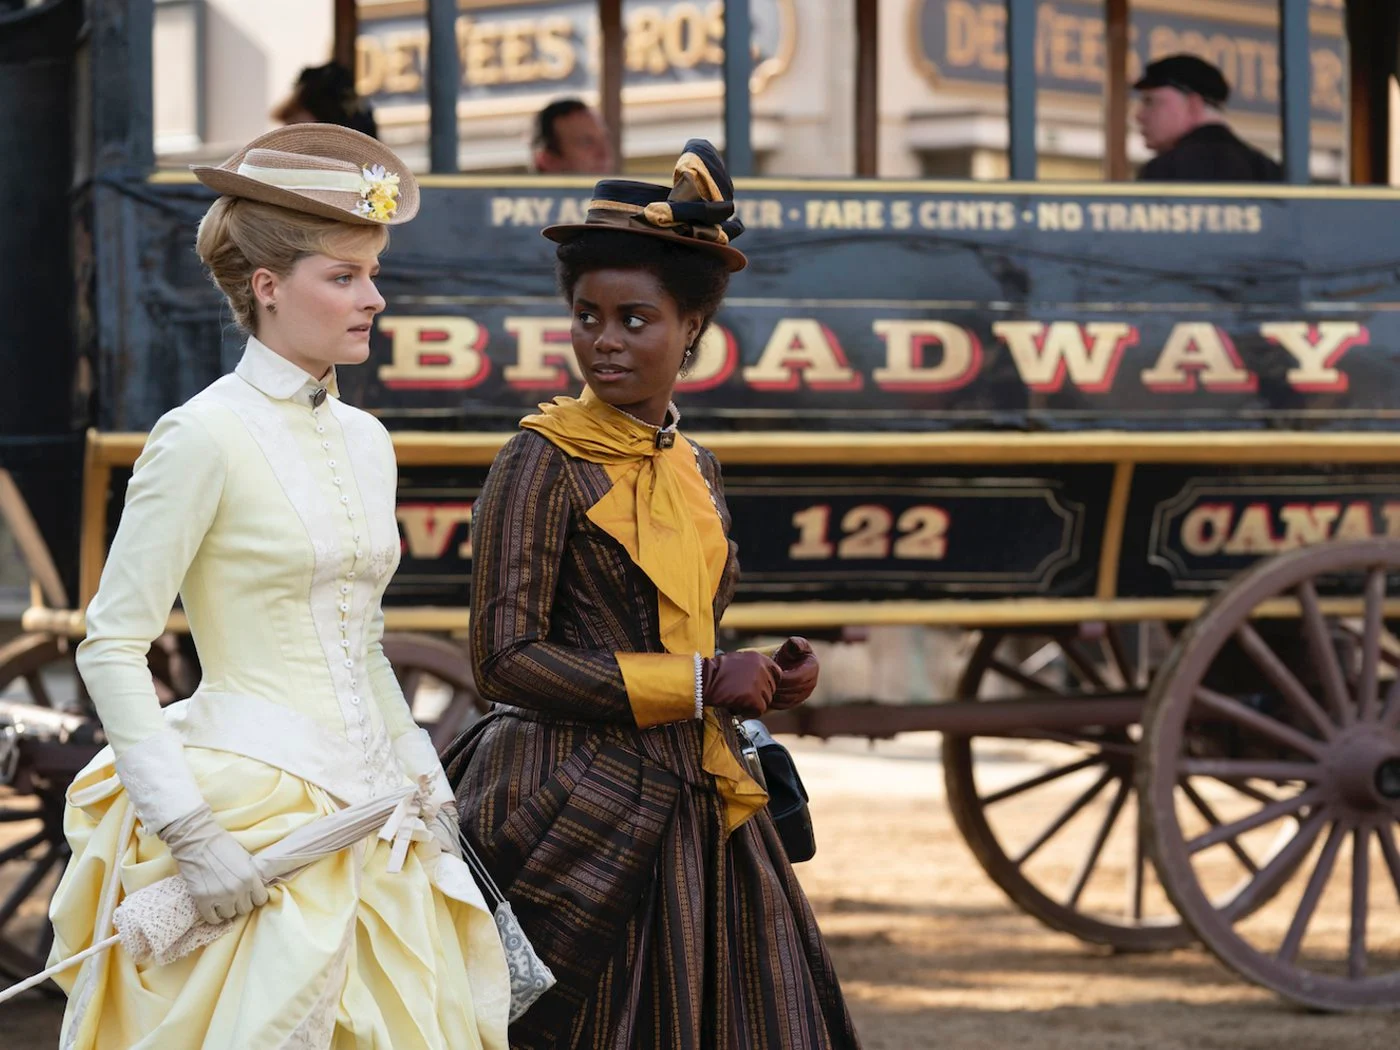 Period drama 'Gilded Age' faithfully depicts New York in late 1800s